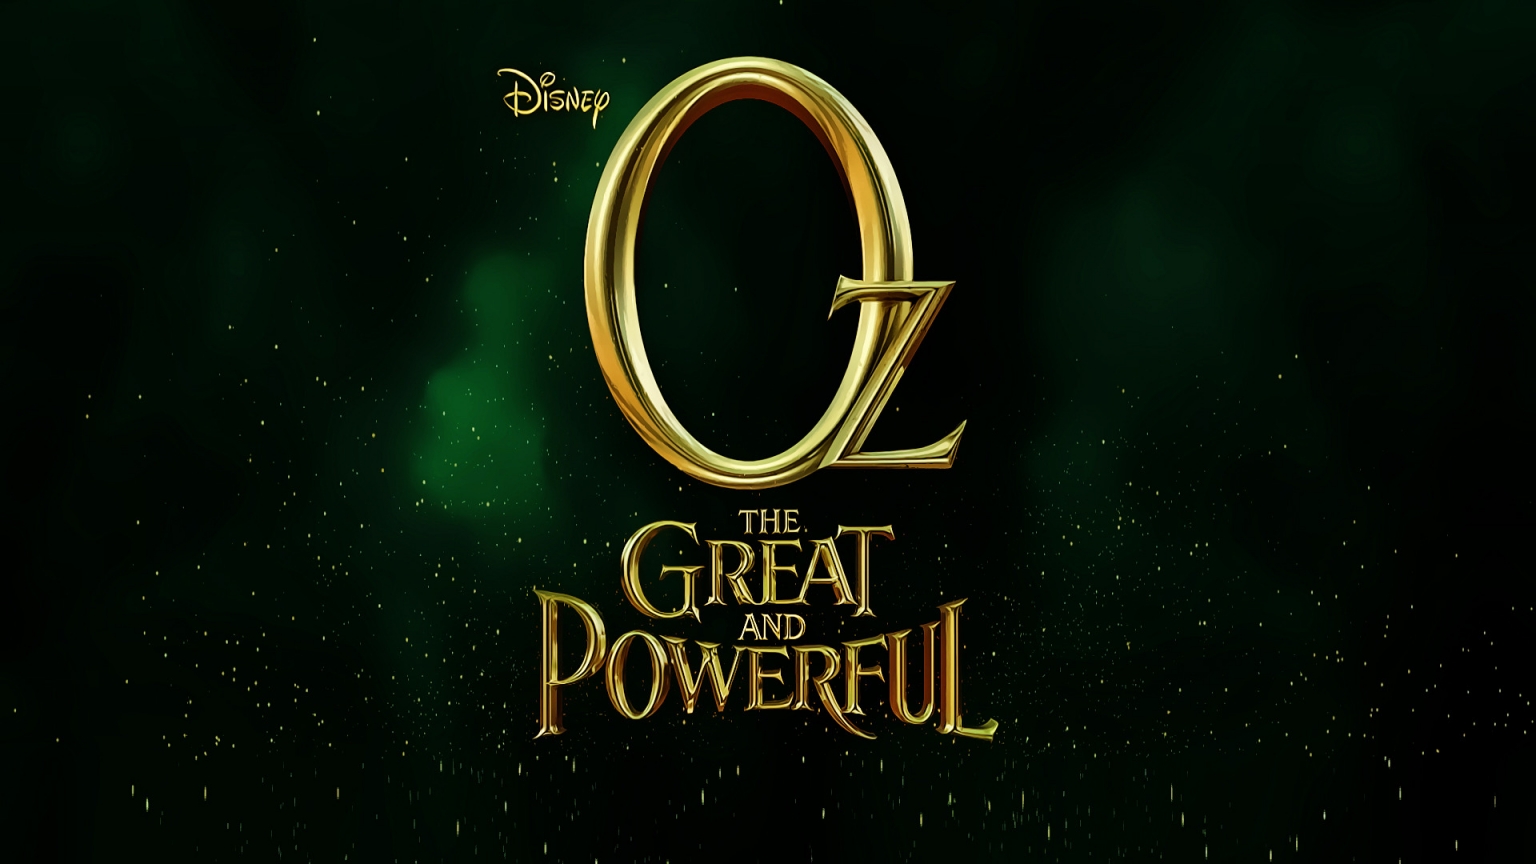 2013 Oz the Great and Powerful for 1536 x 864 HDTV resolution